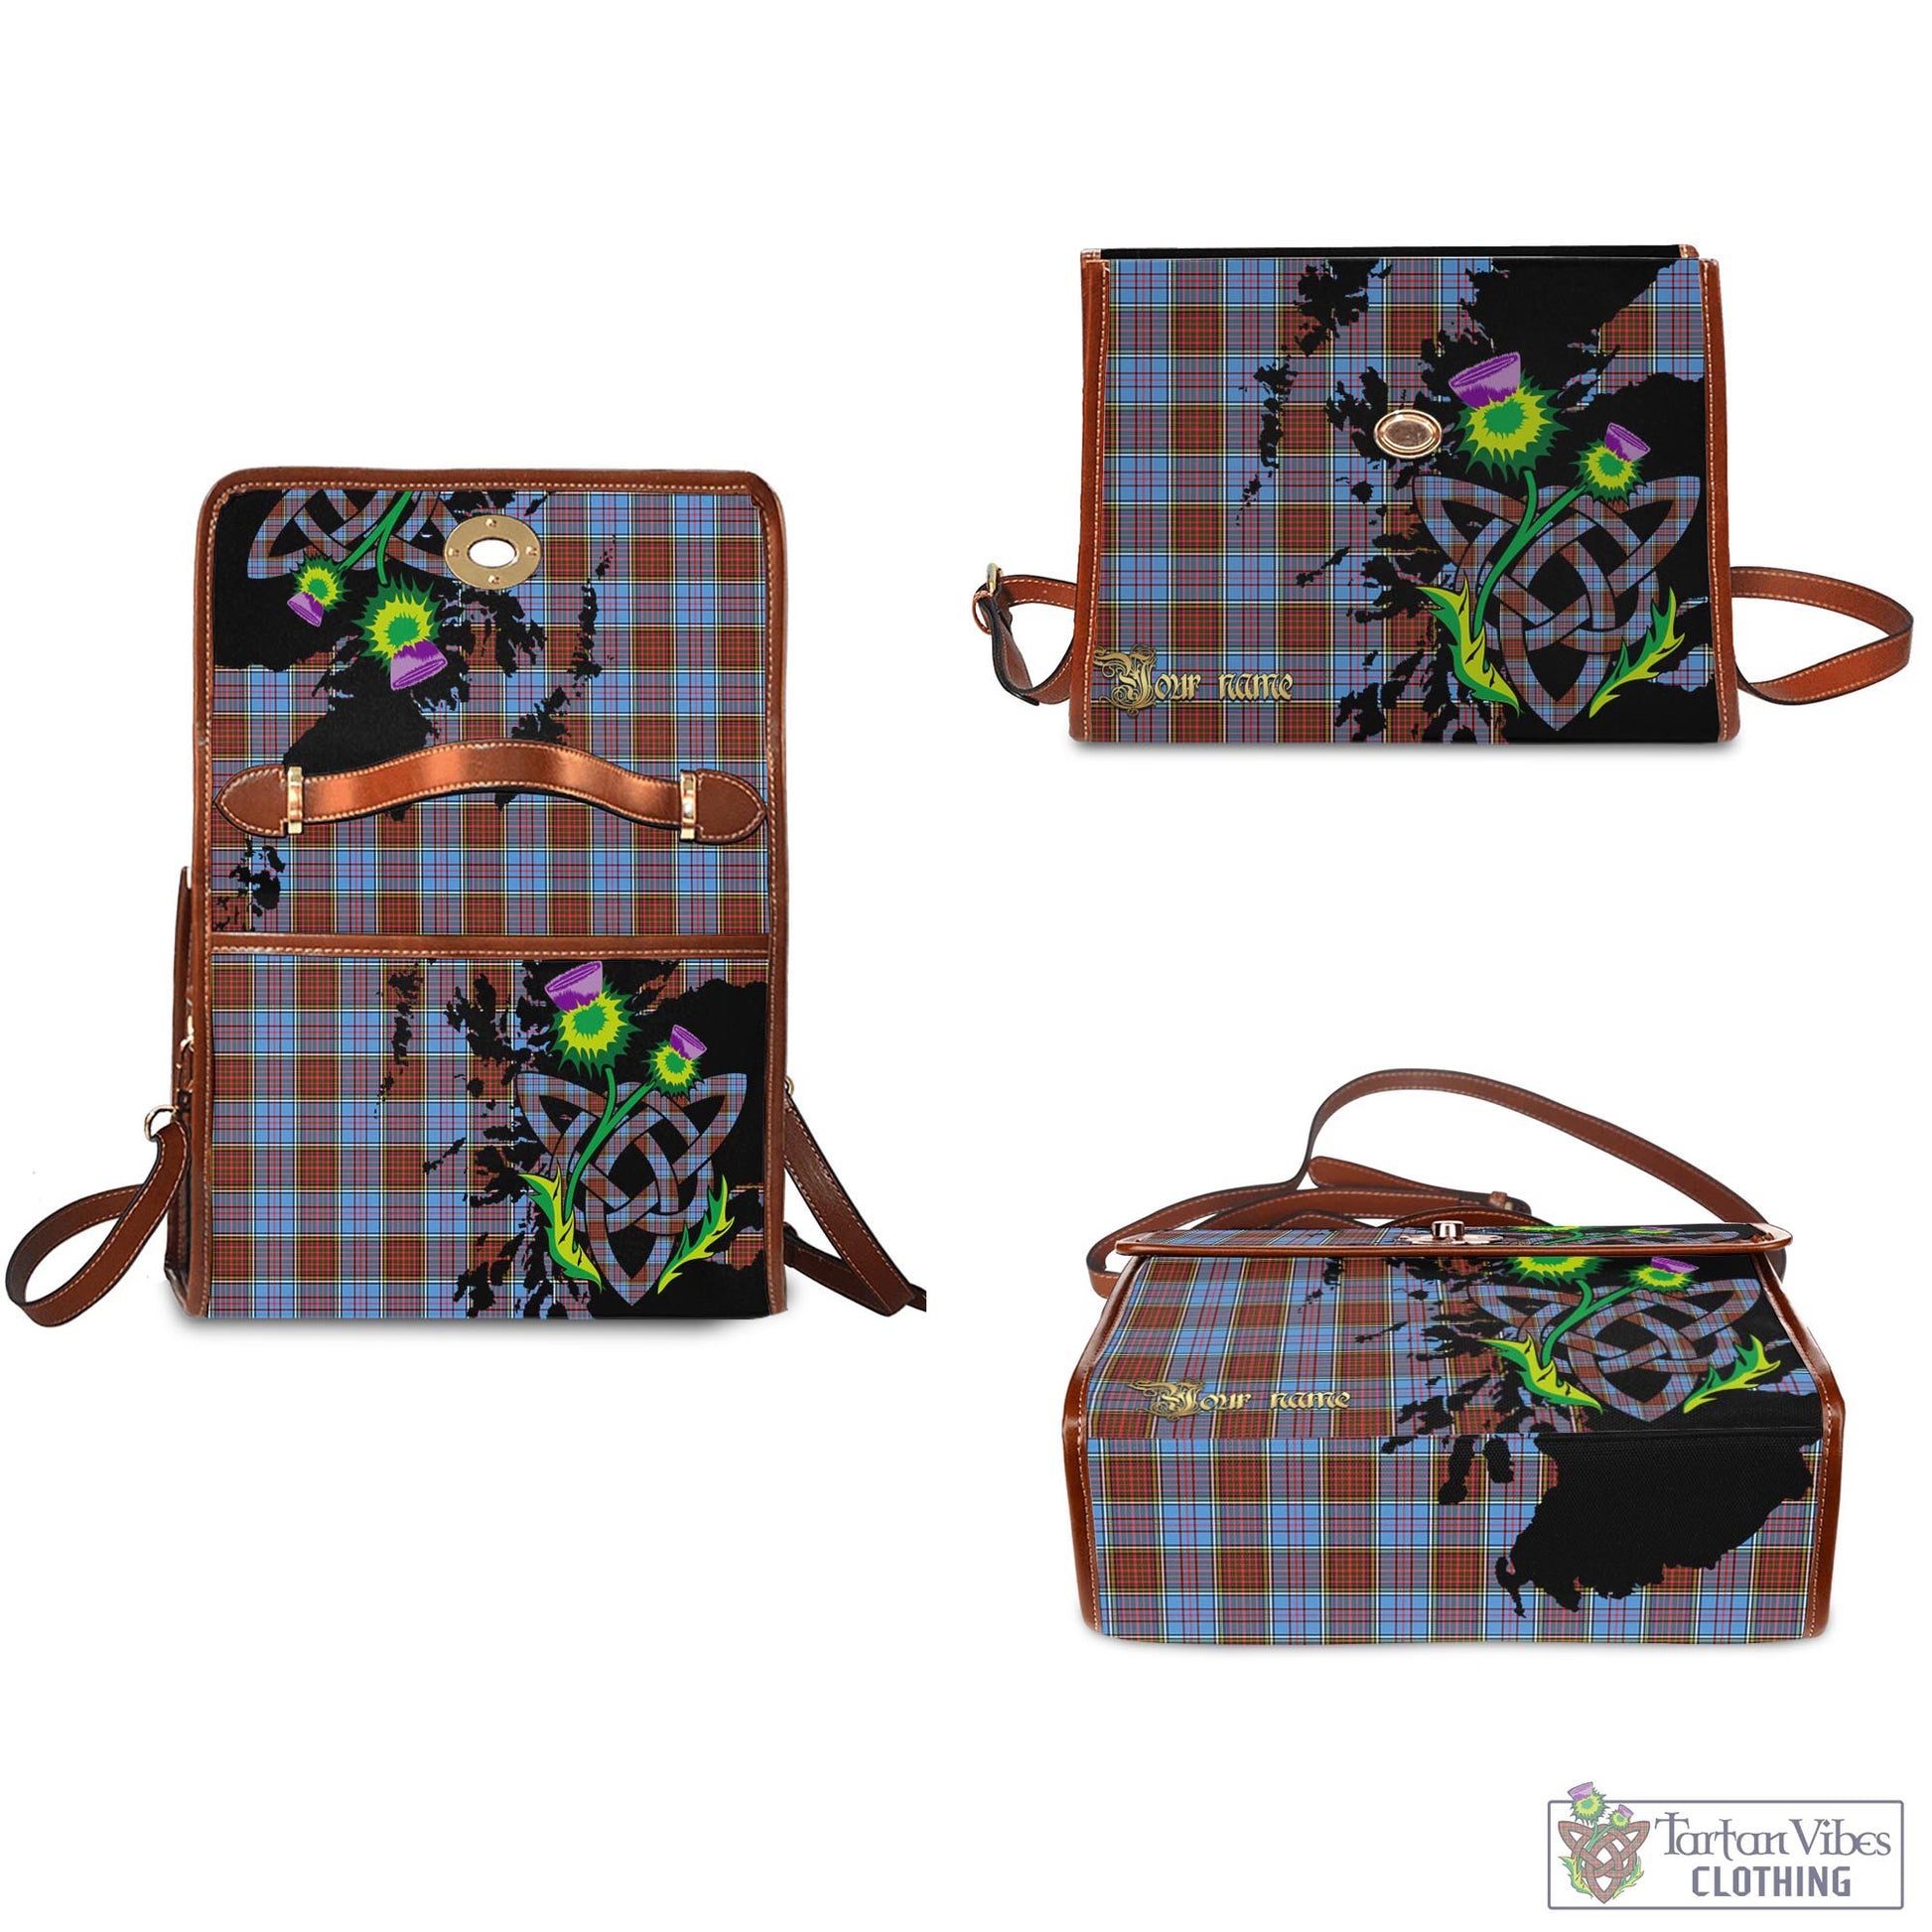 Tartan Vibes Clothing Anderson Modern Tartan Waterproof Canvas Bag with Scotland Map and Thistle Celtic Accents